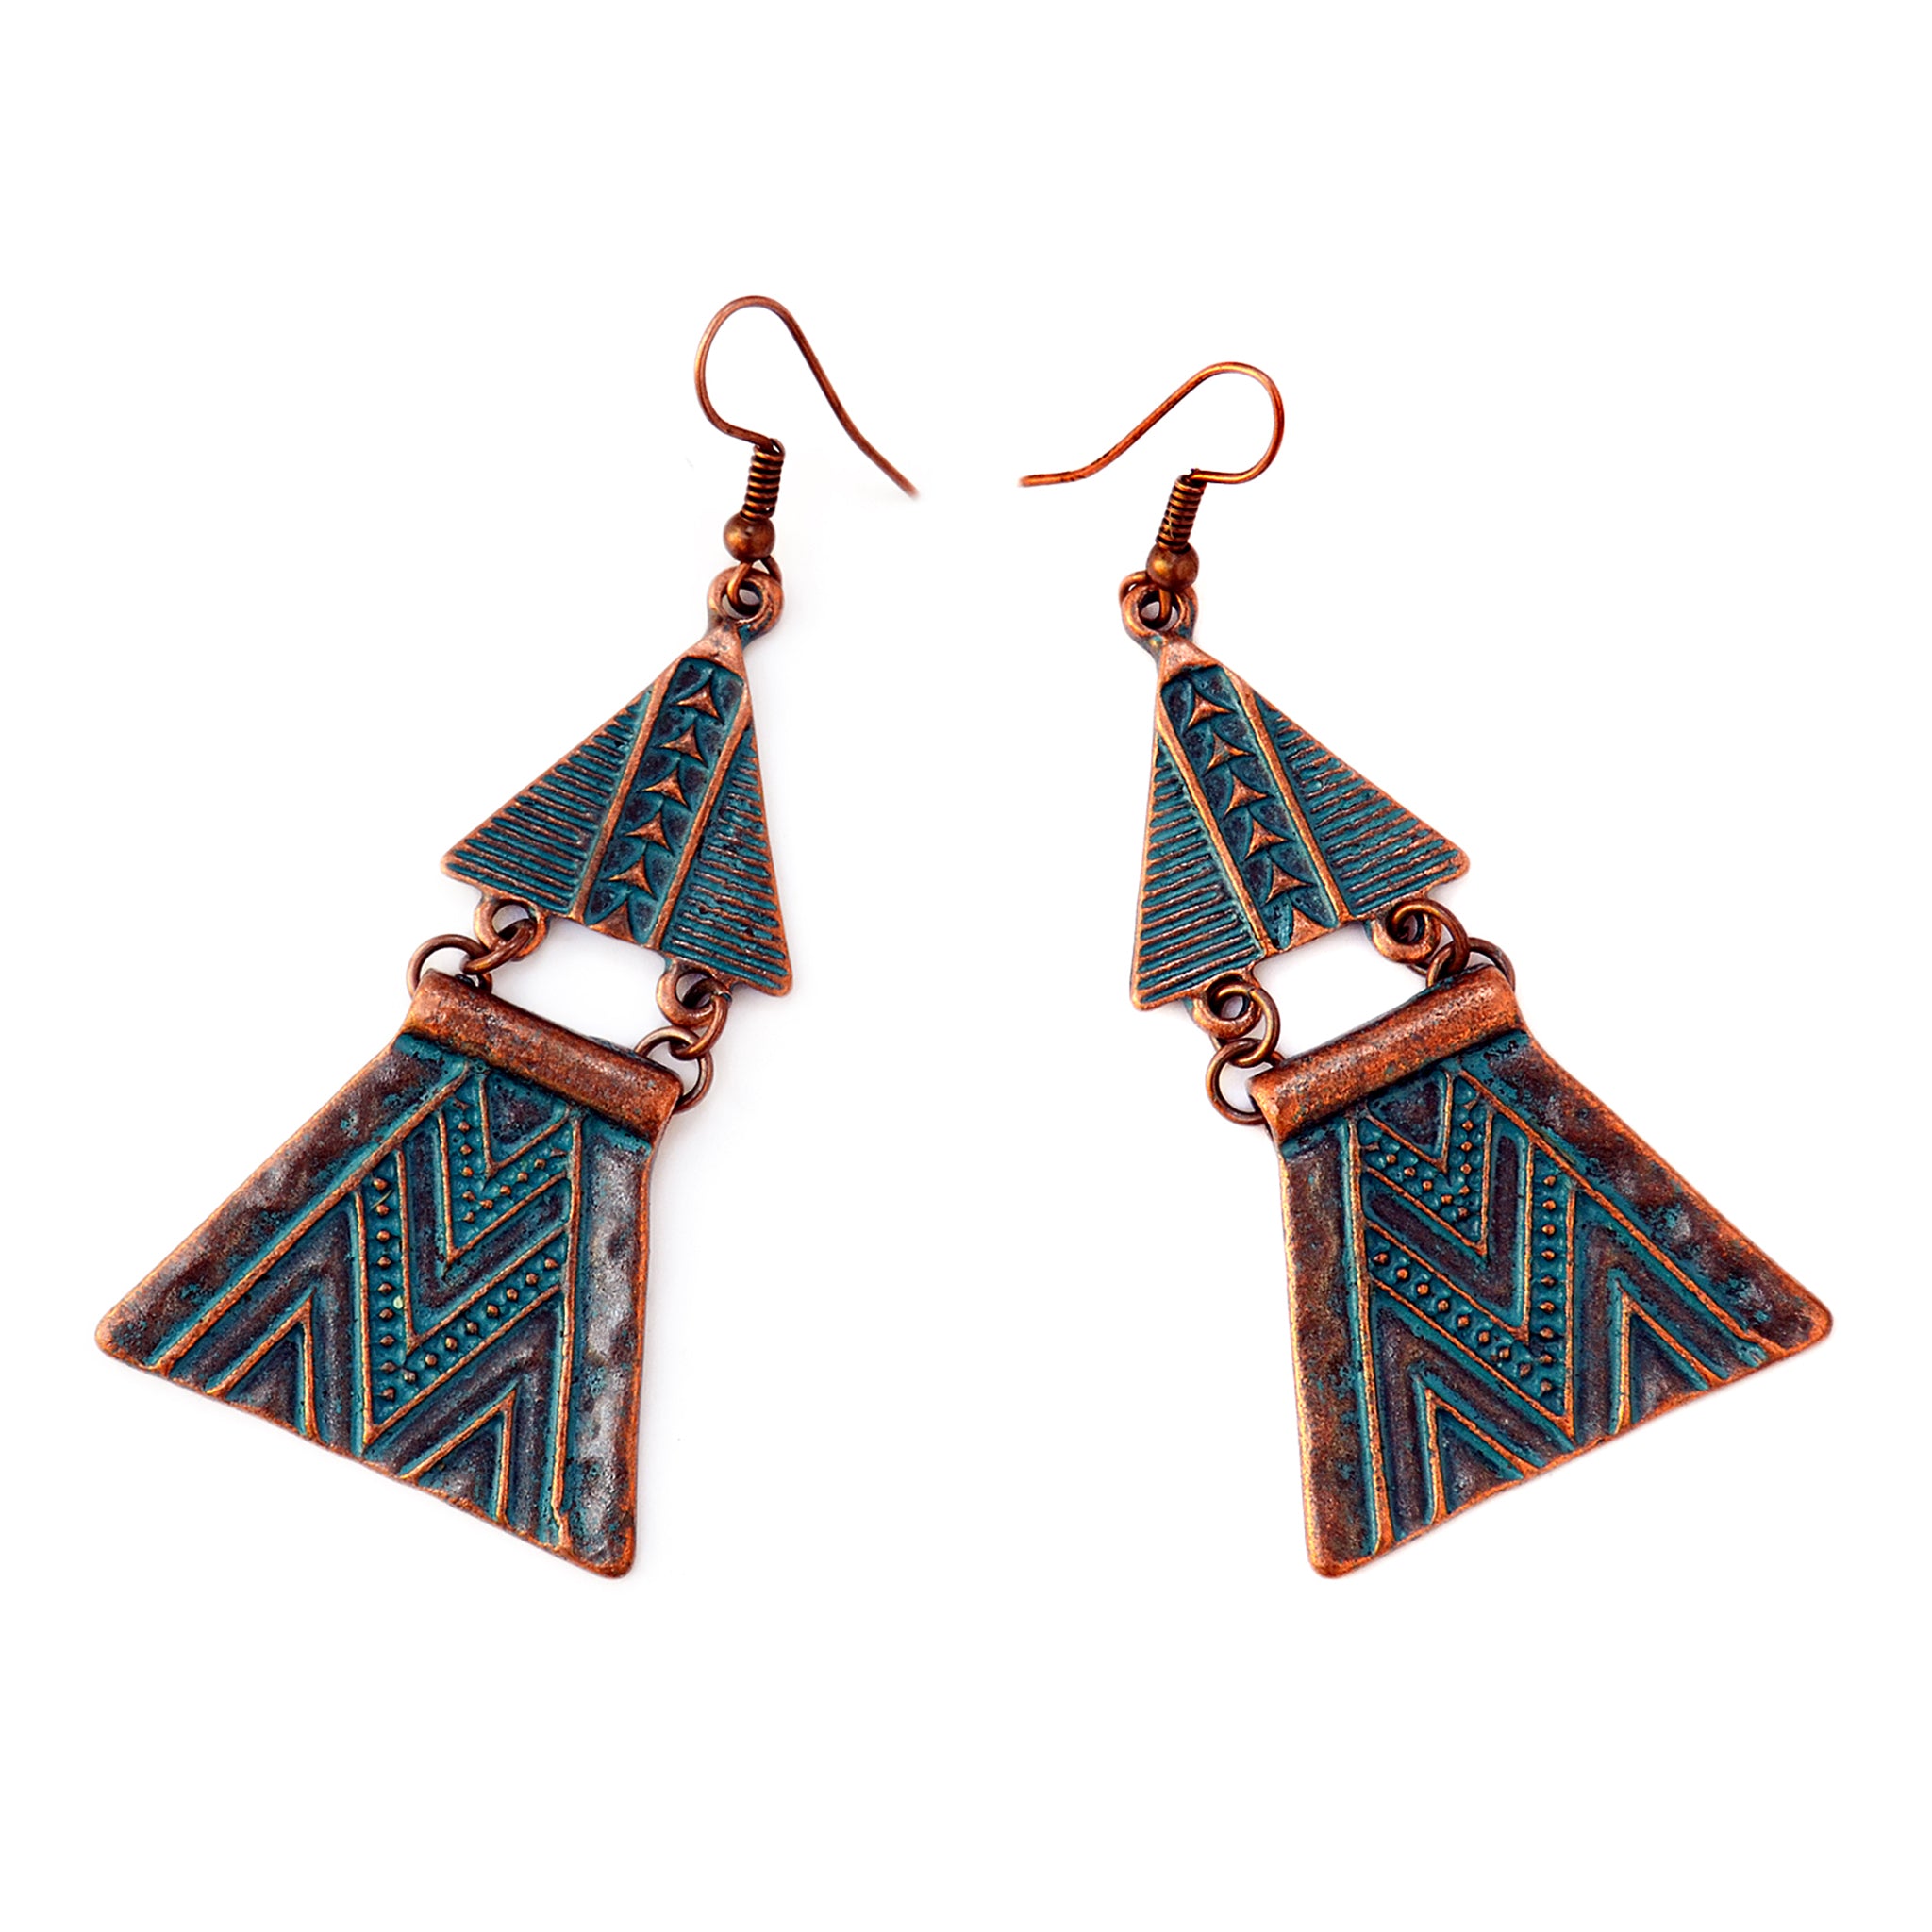 Aztec earrings with green patina